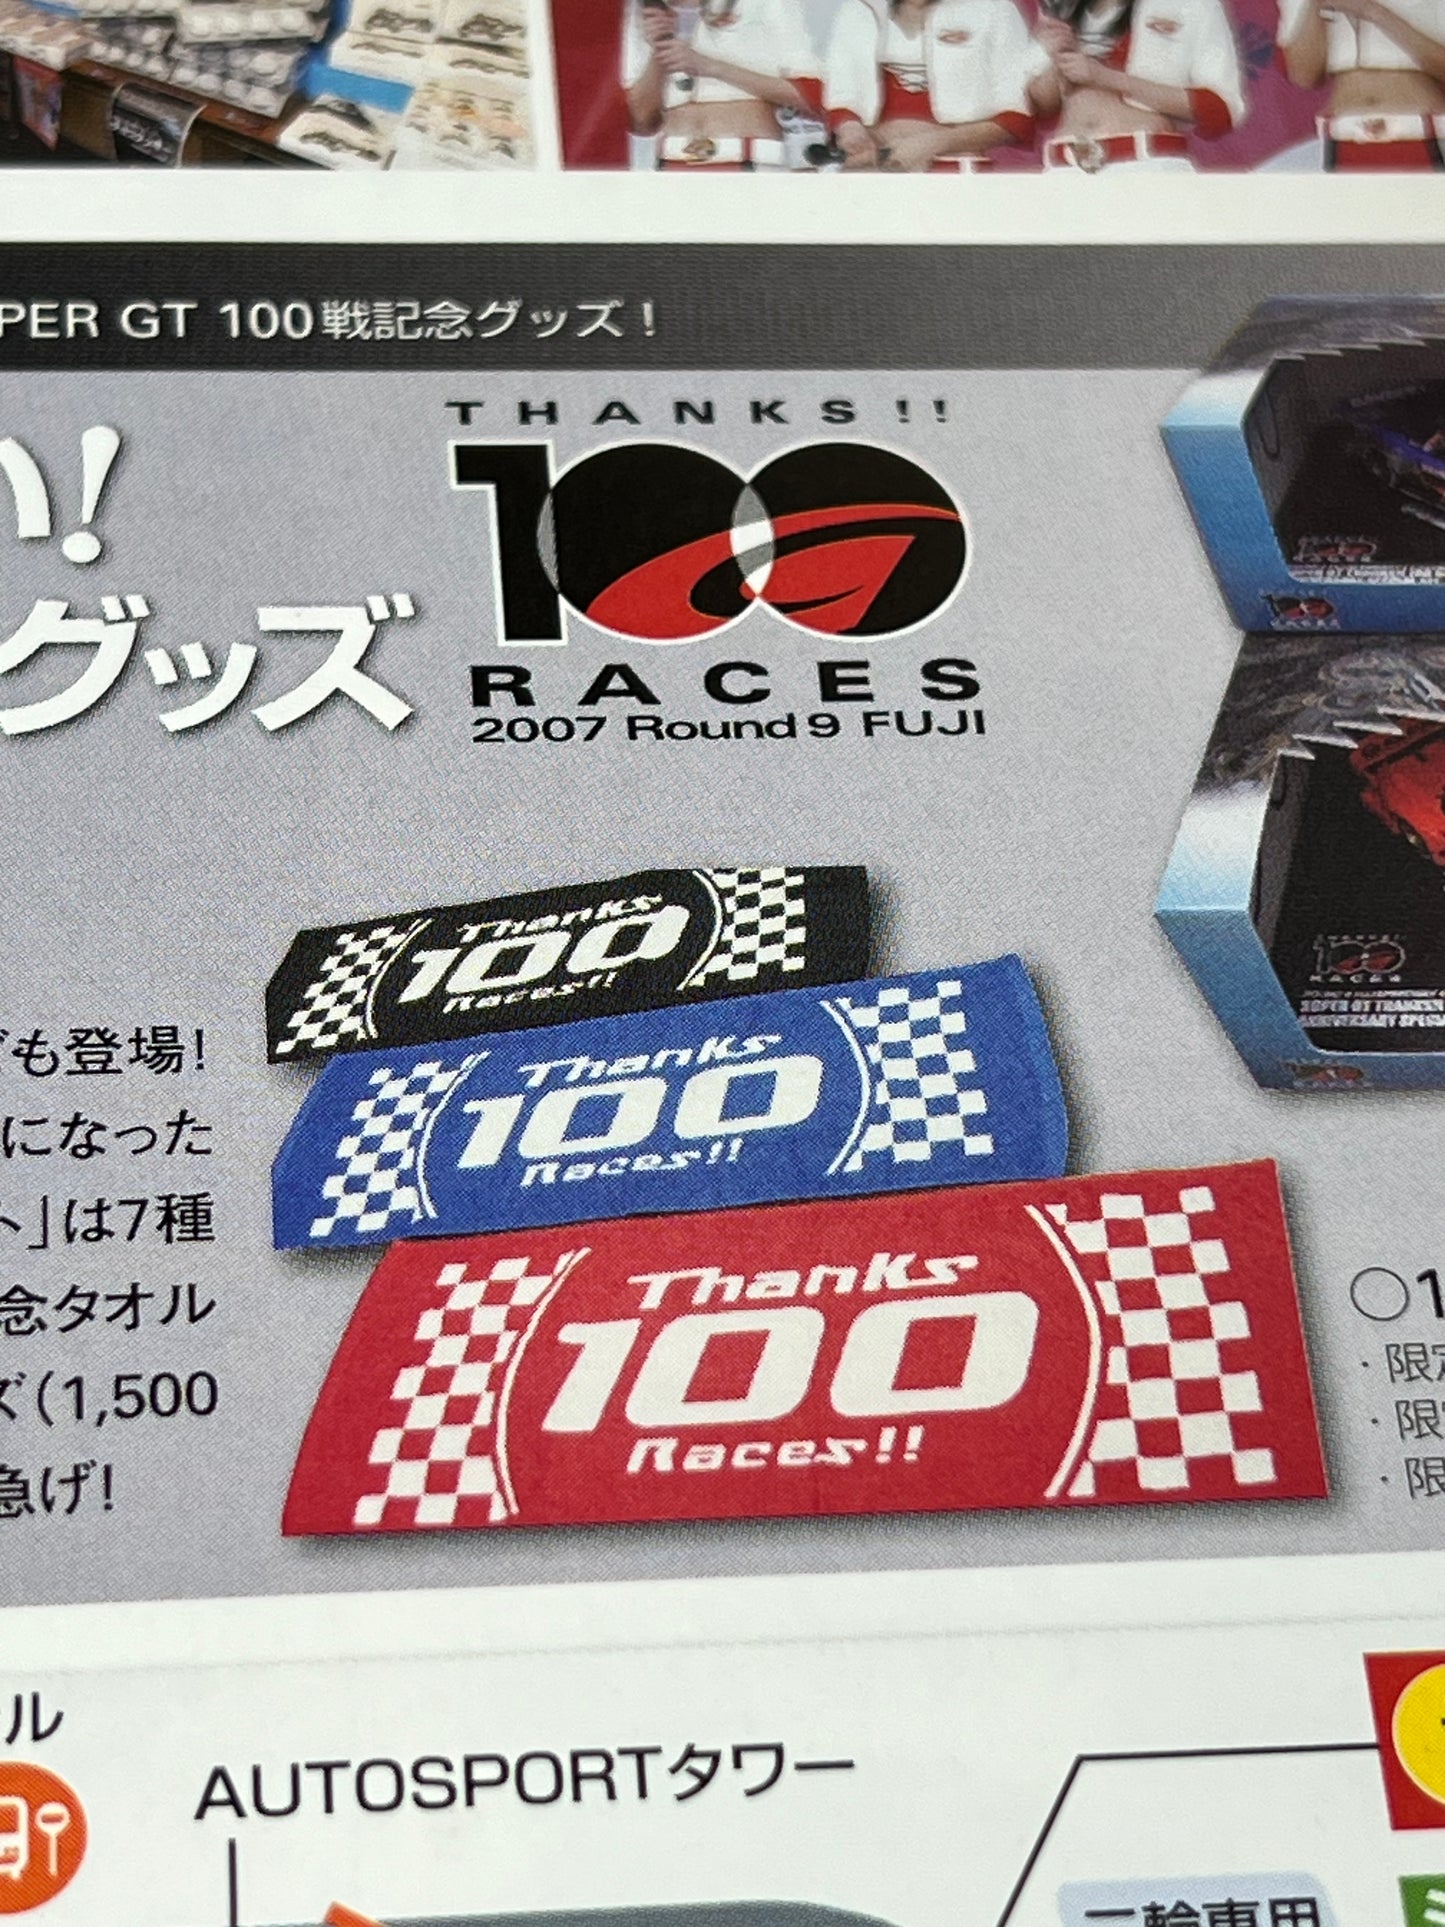 2007 AUTOBACS SuperGT Fuji Speedway  GT Round 9 Official Race Program and Towel Set